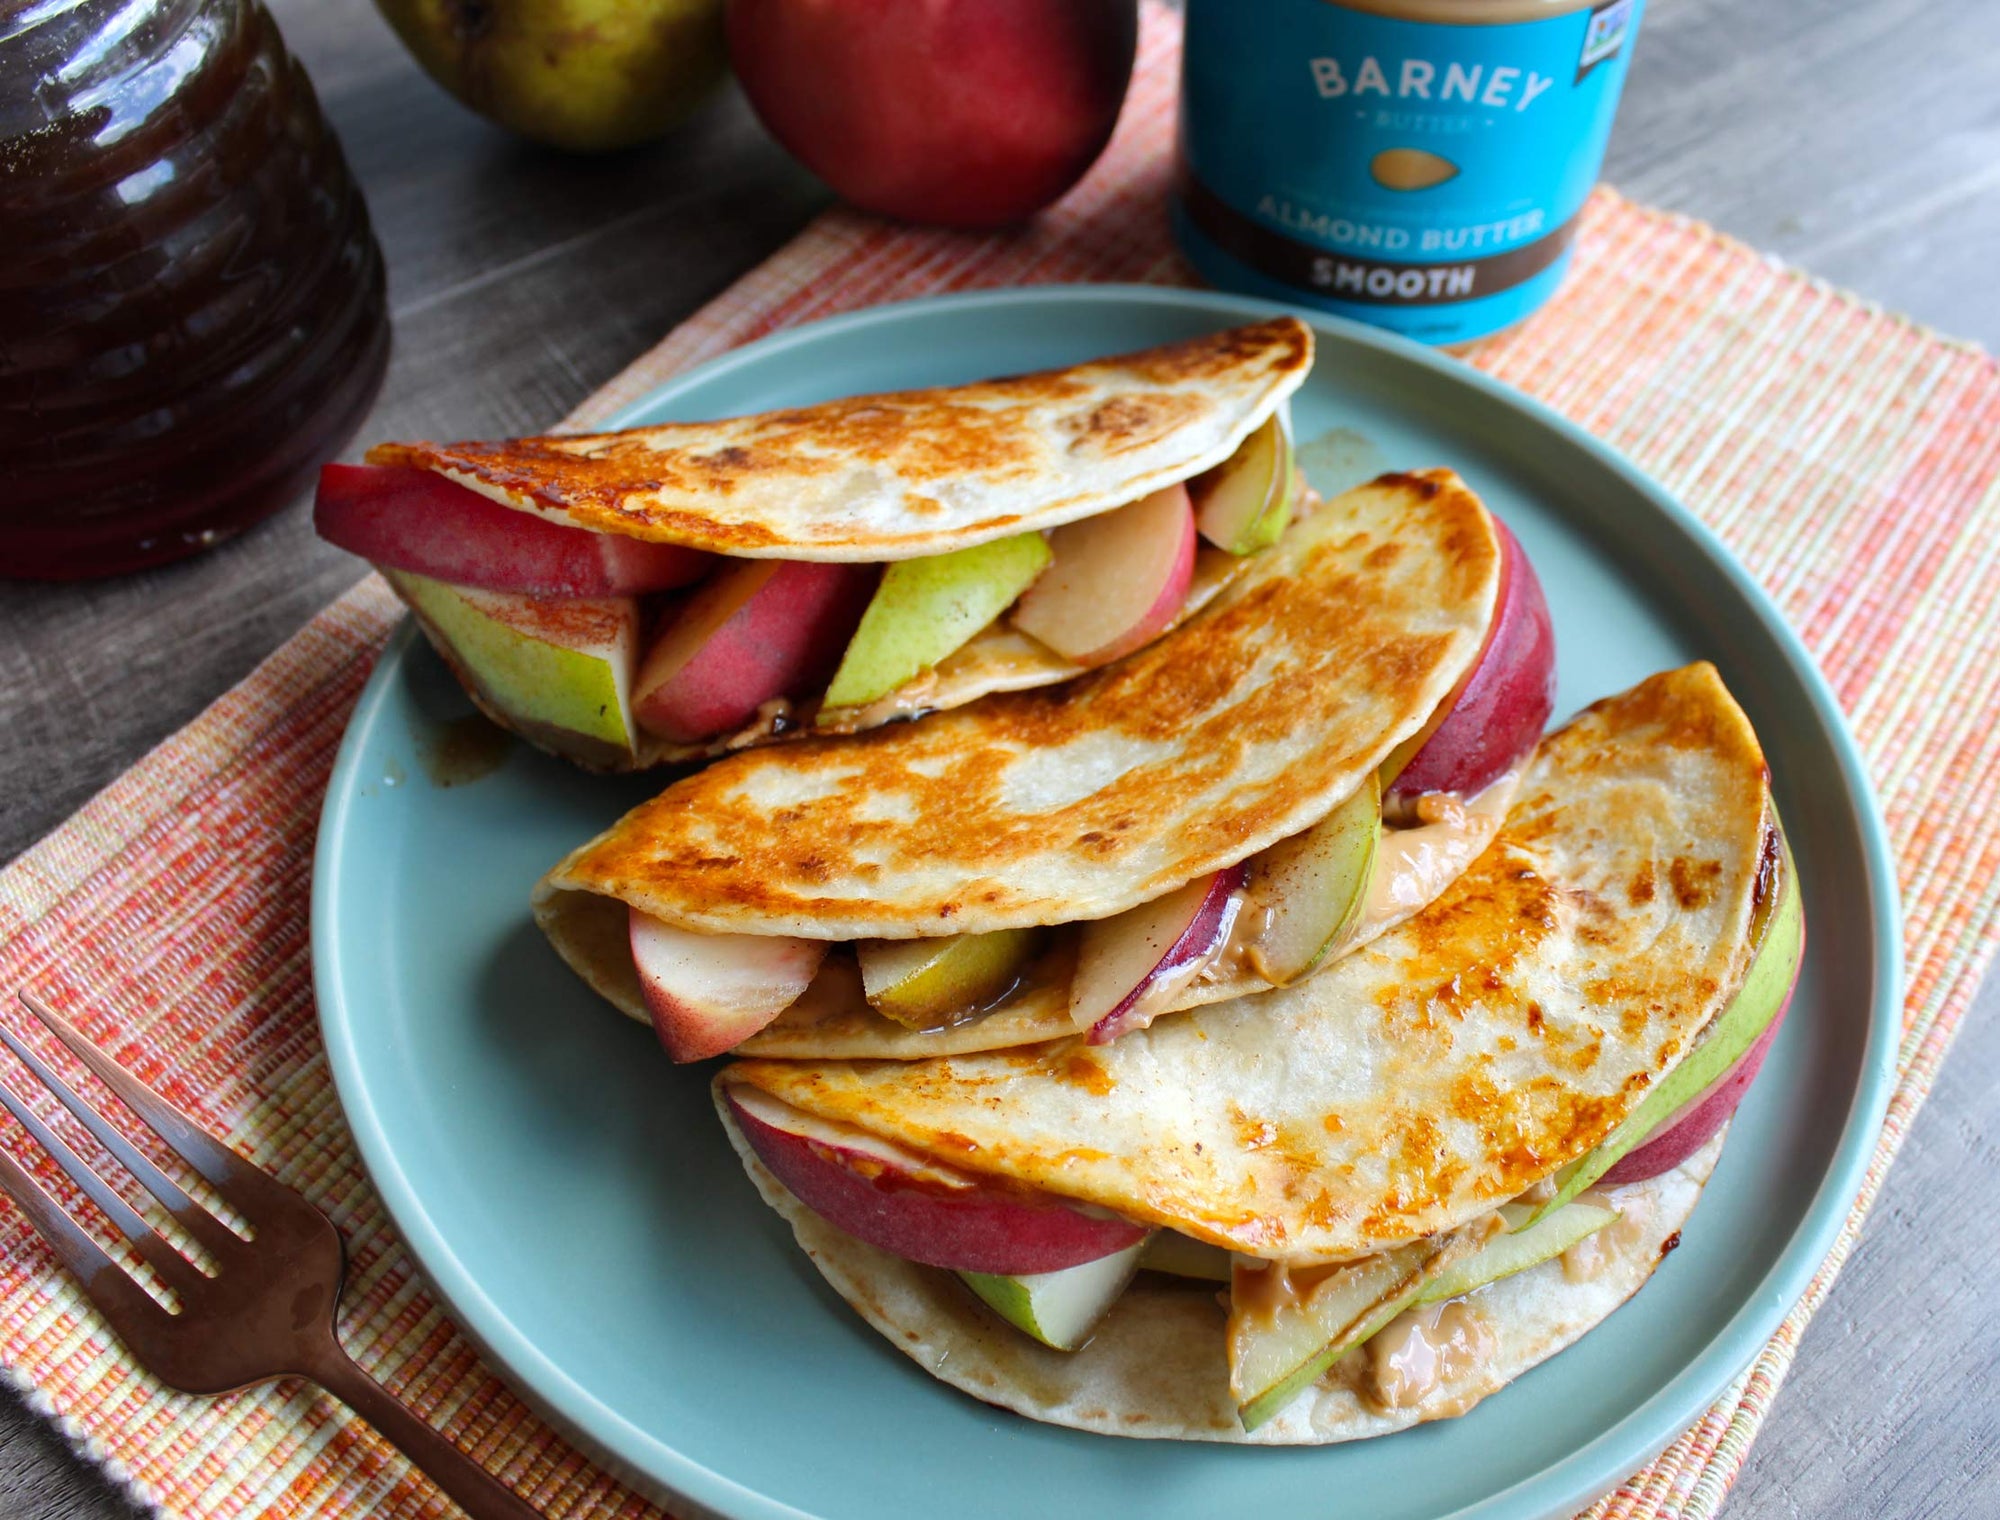 Barney Butter Peaches & Pears Wrap